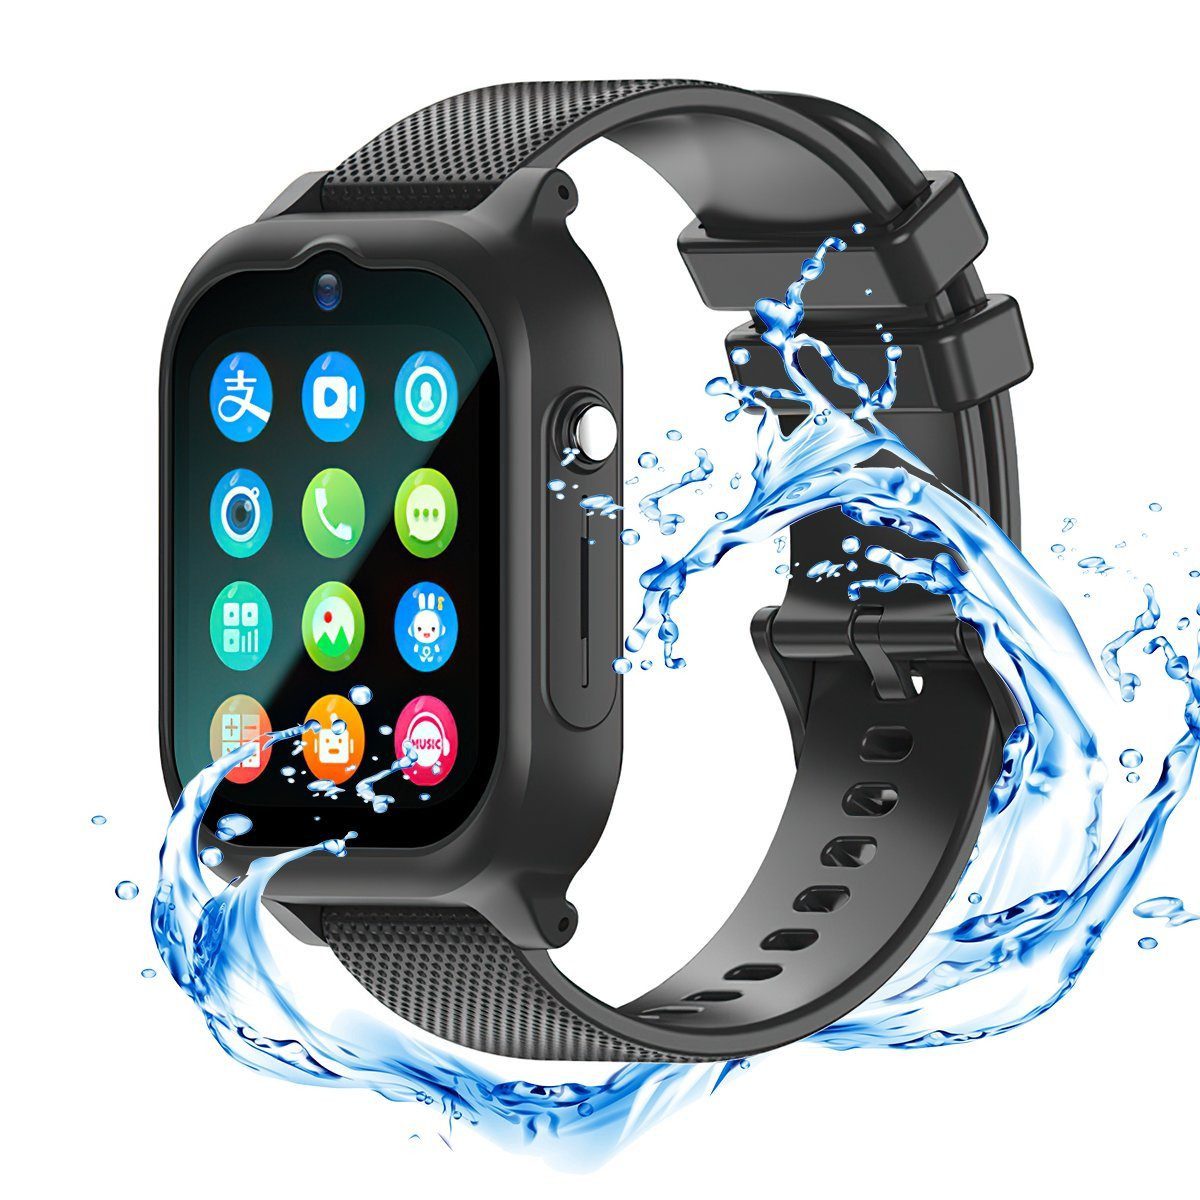 Gontence Kinderuhr,HD-Videoanrufe,GPS-Ortung,SOS,700mAh,240*280 Smartwatch (1.8 Zoll)